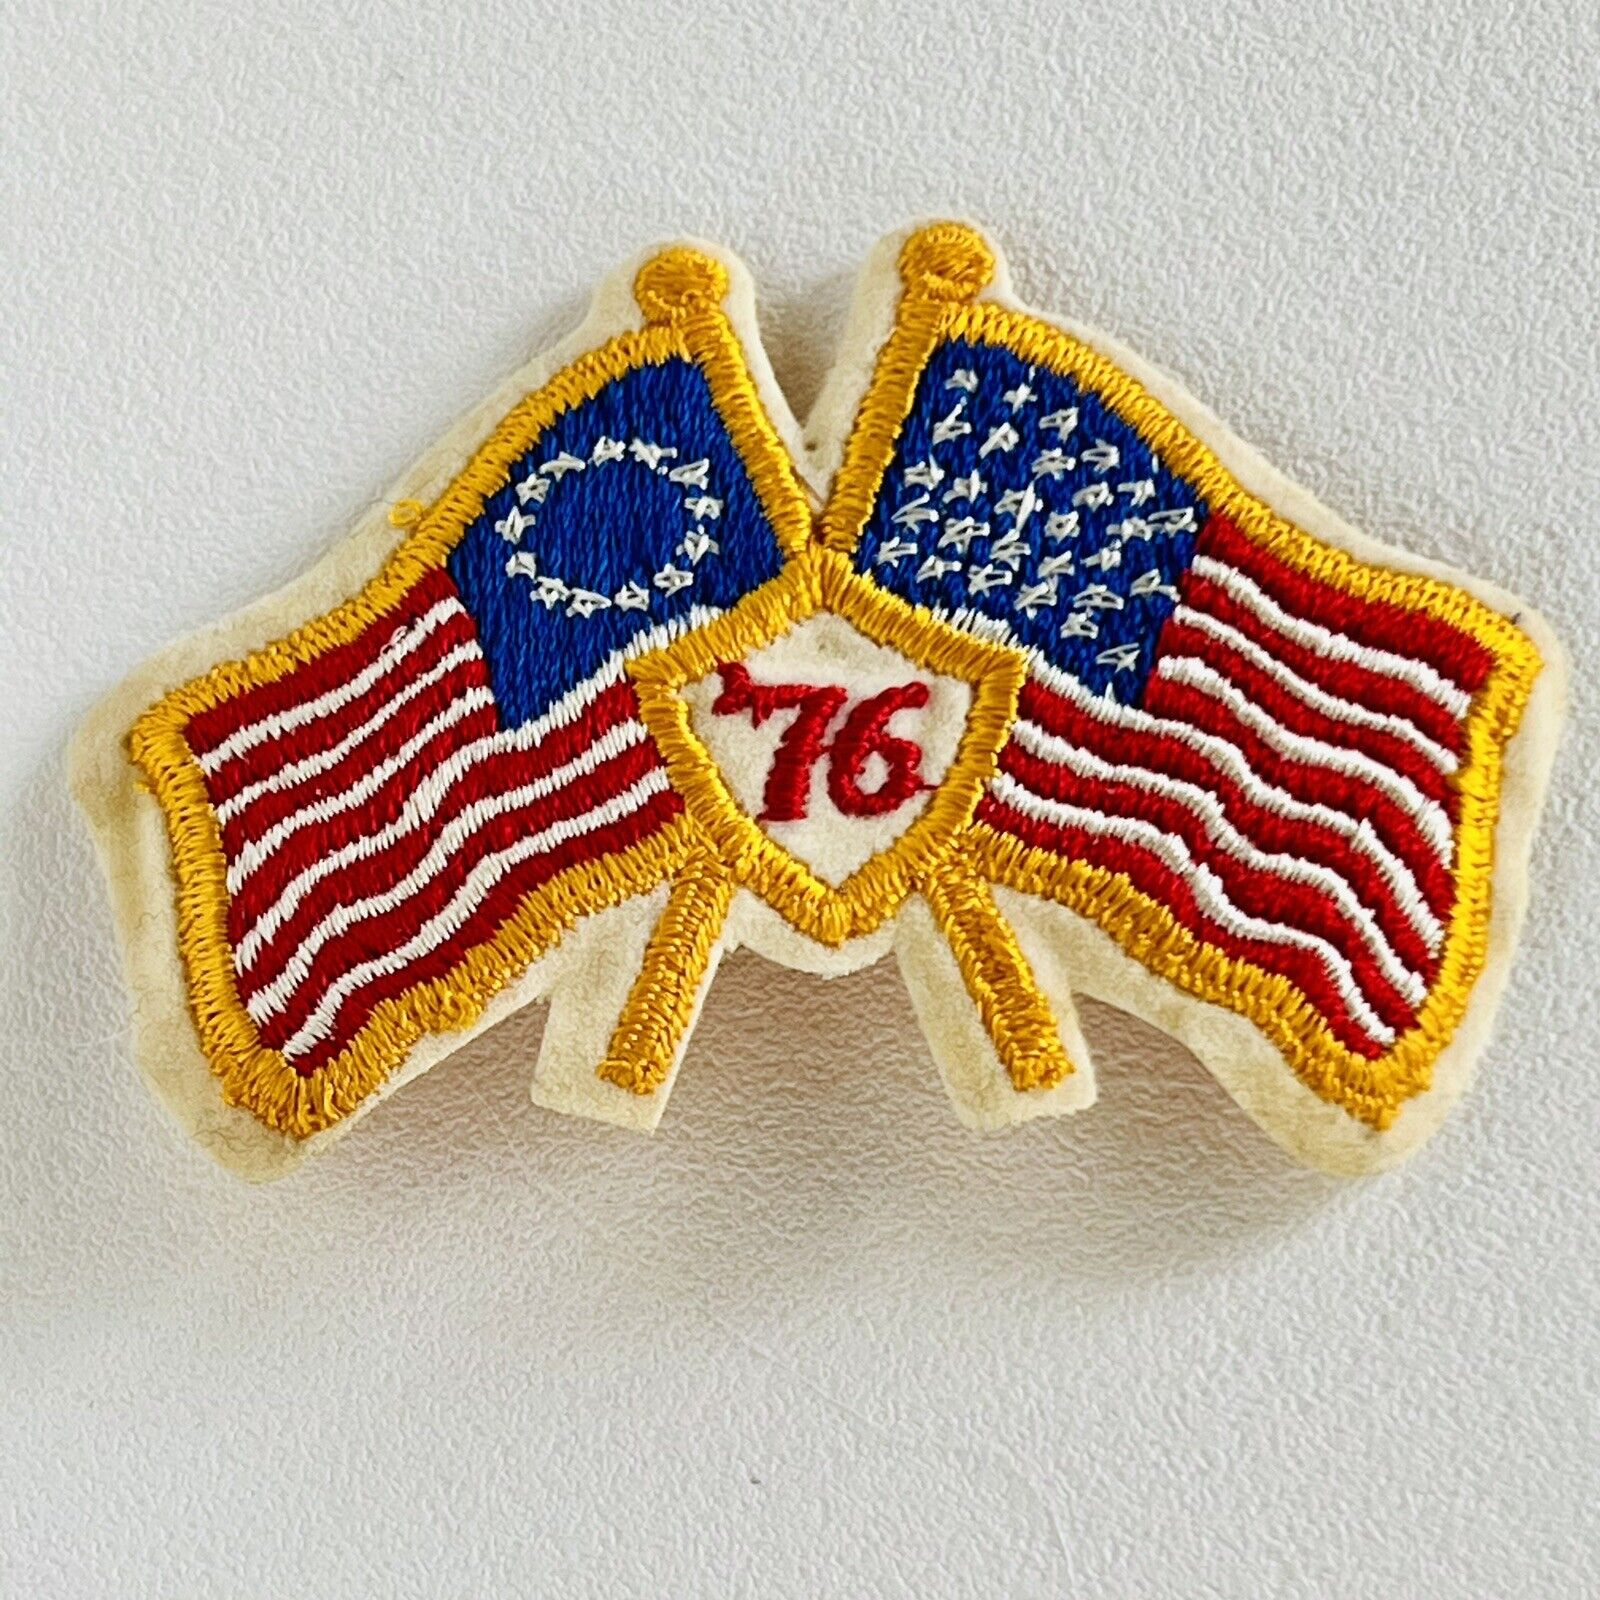 Vintage US Bicentennial ‘76 1776-1976 Crossed American Betsy Ross Flags Patch